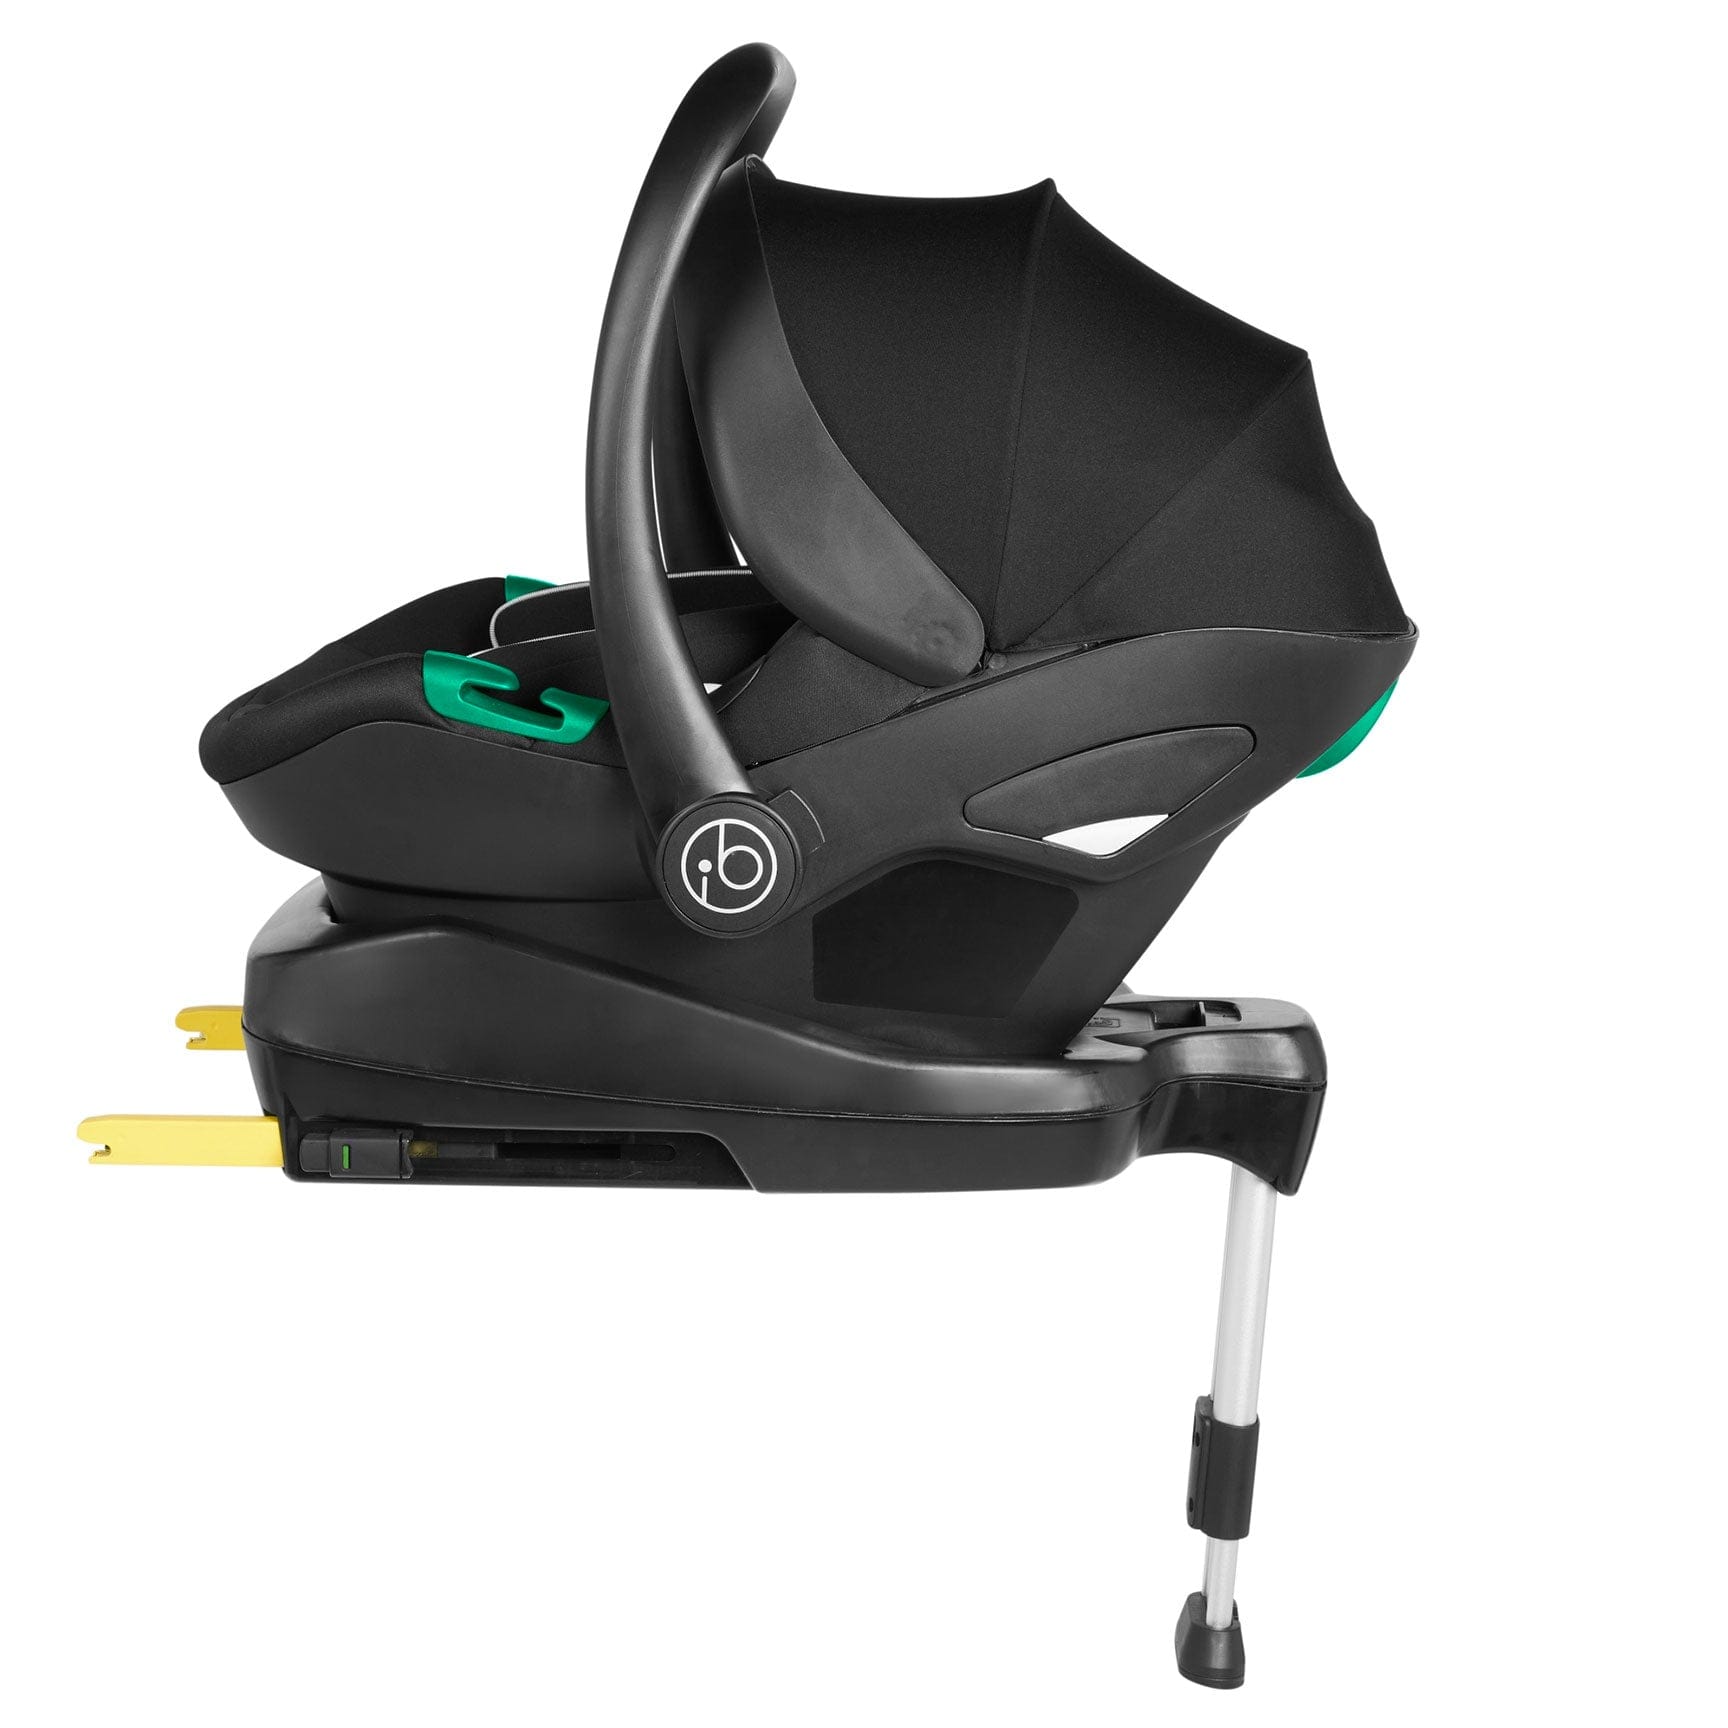 Ickle Bubba Stomp Luxe All-in-One Travel System with Isofix Base in Silver/Midnight/Black Travel Systems 10-011-300-249 5056515026535